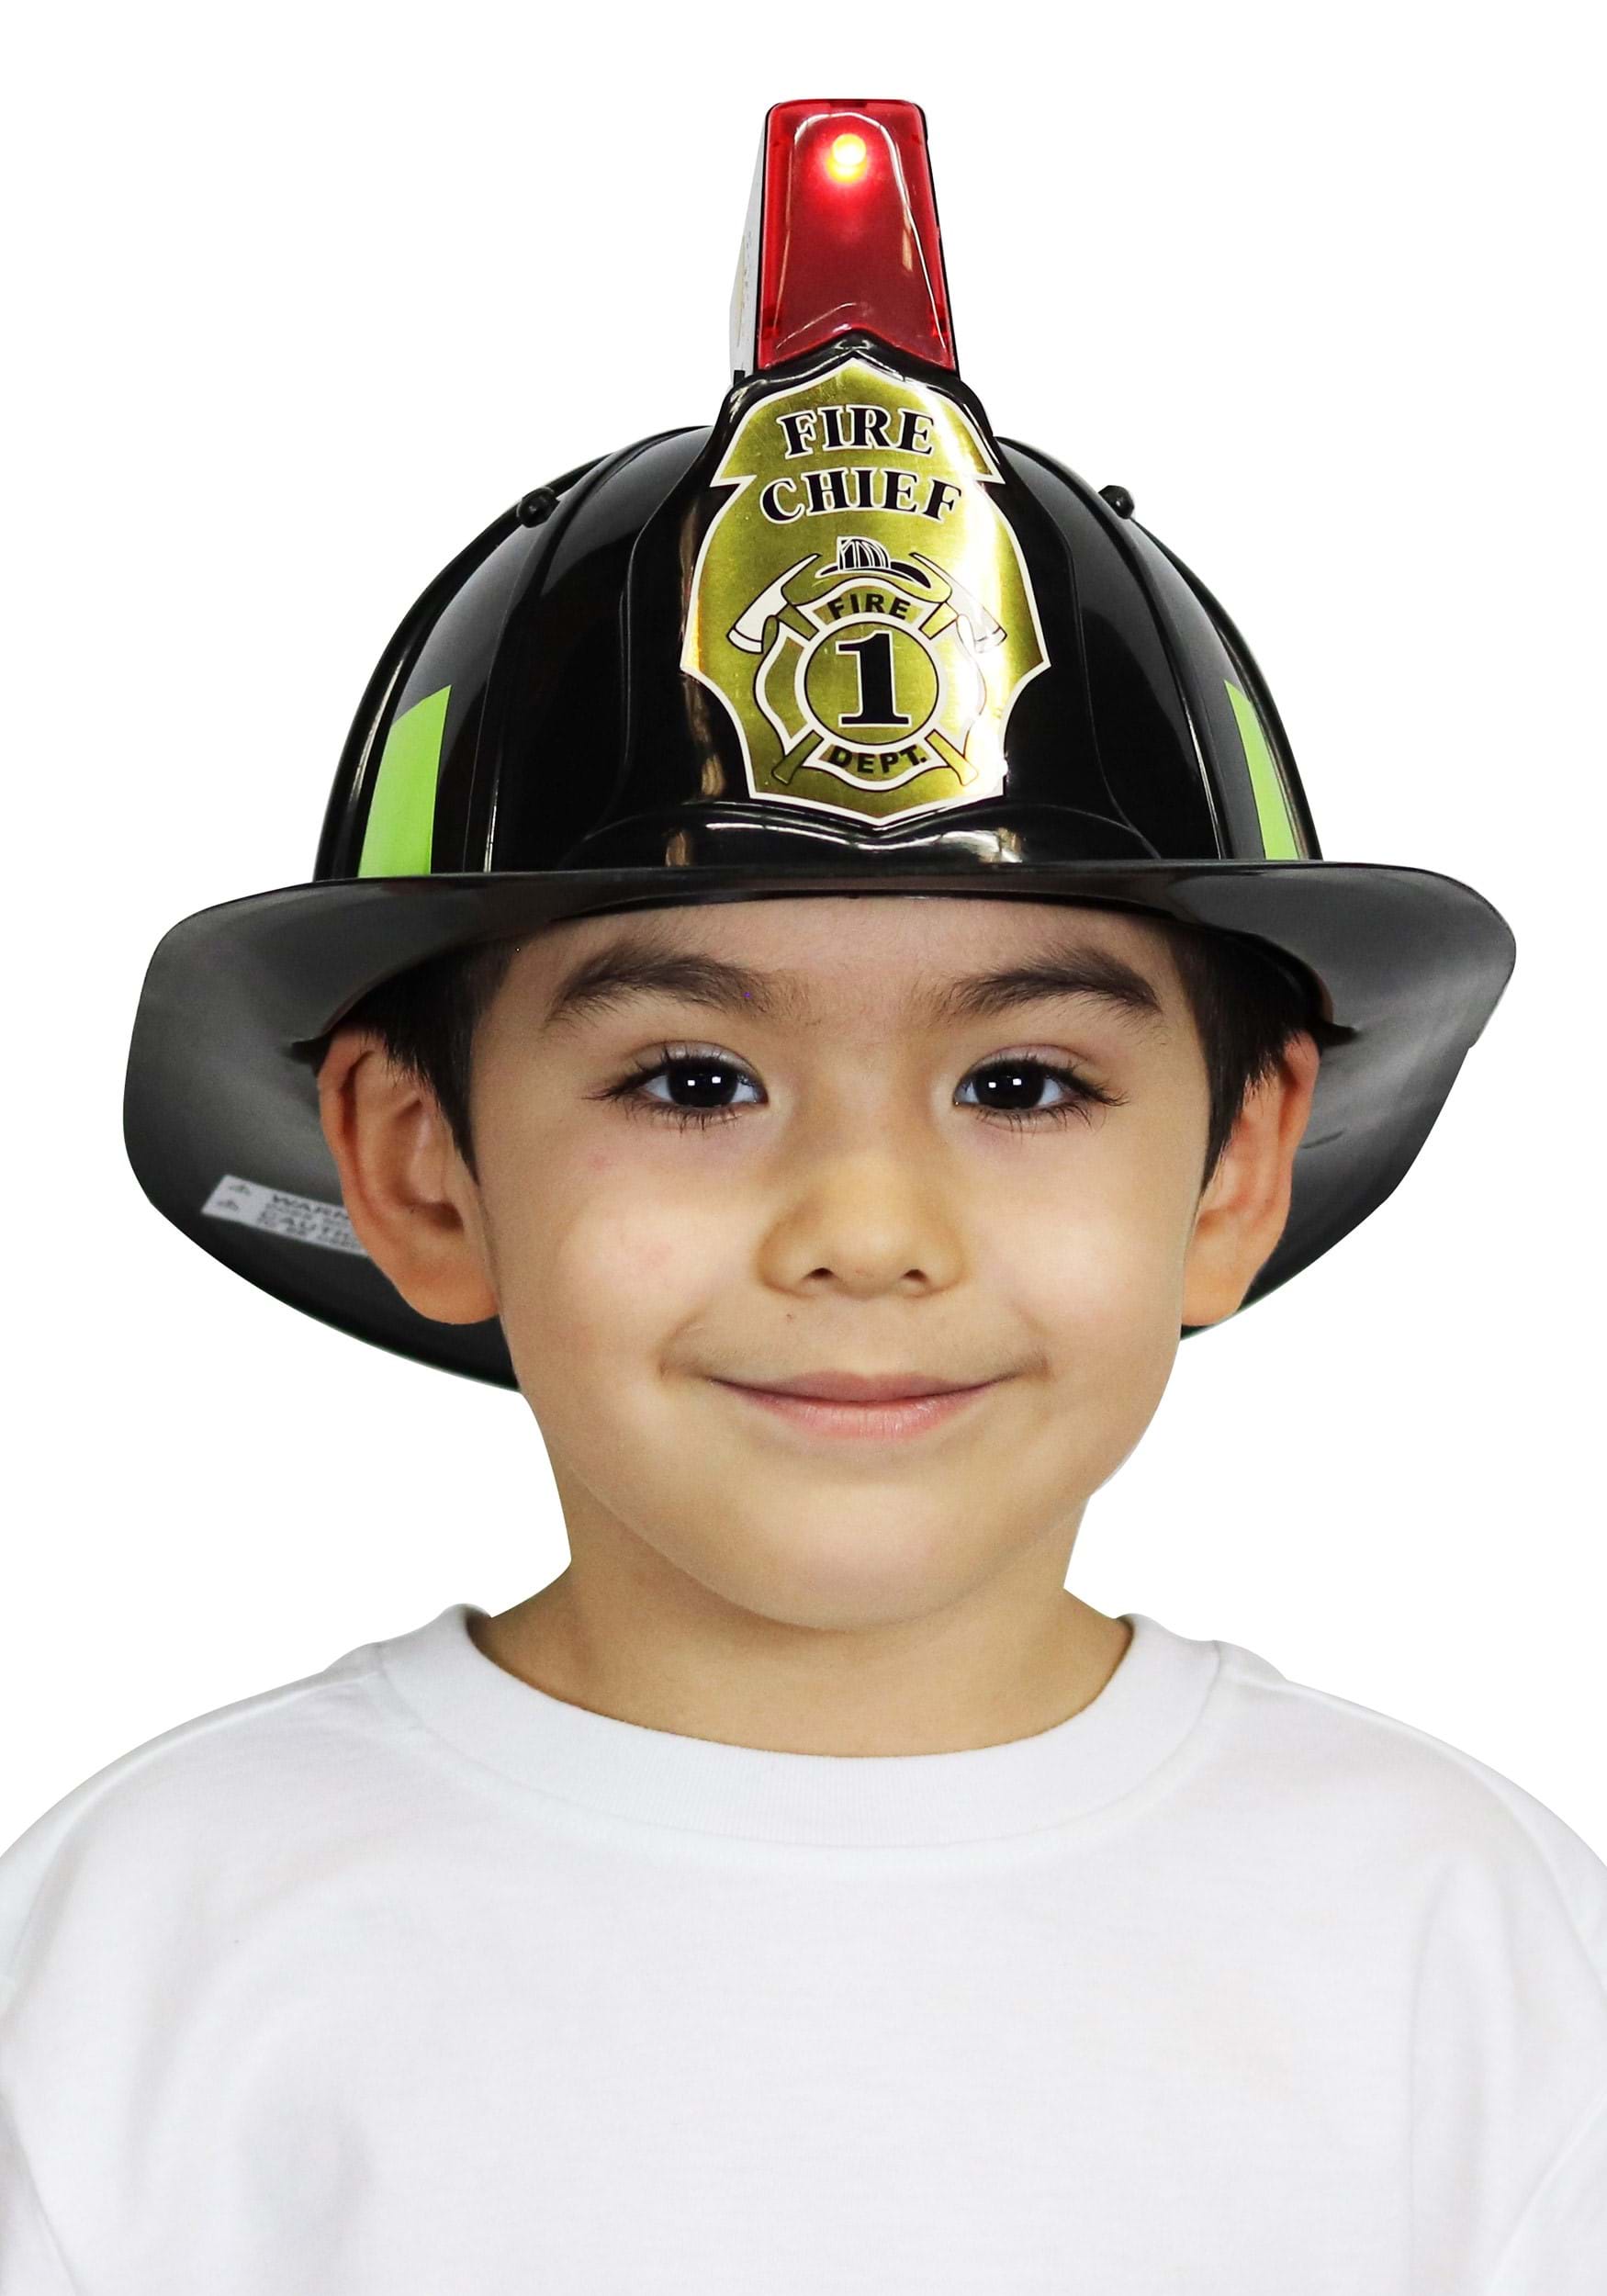 Fire Chief Plastic Hat Black Child Size Firefighter Birthday Party Favors 